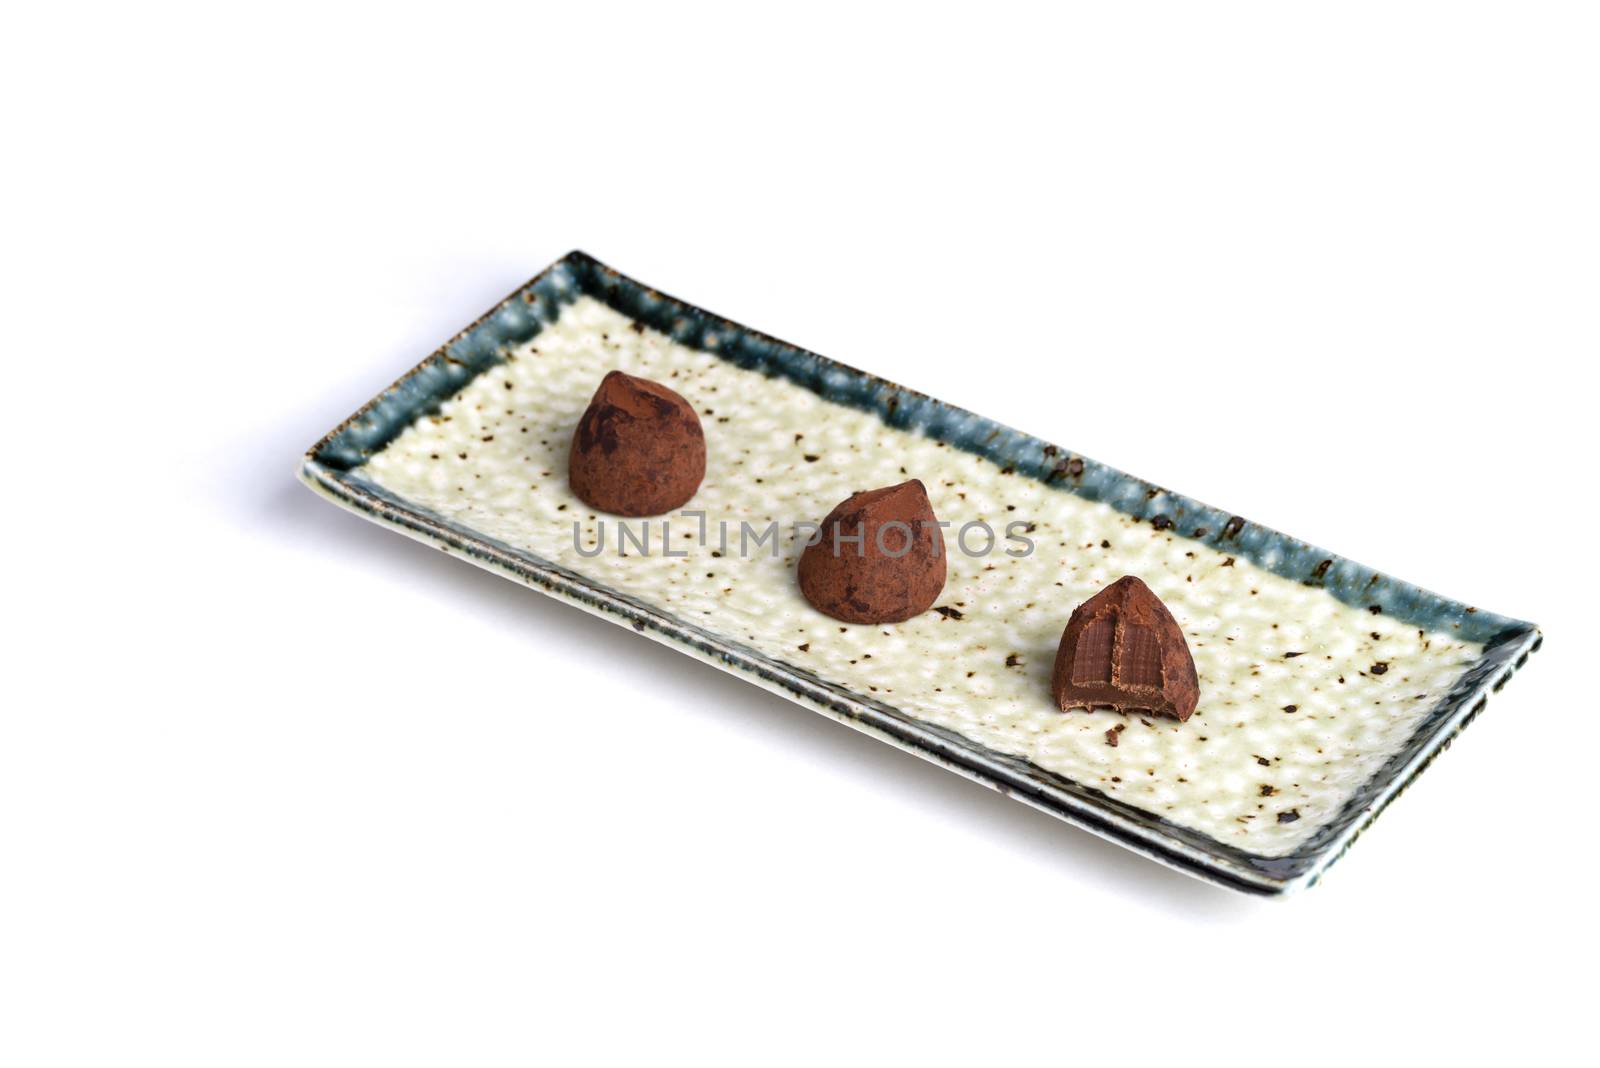 Three chocolate truffles on a ceramic plate with a pure white background. One with a bite taken from it.